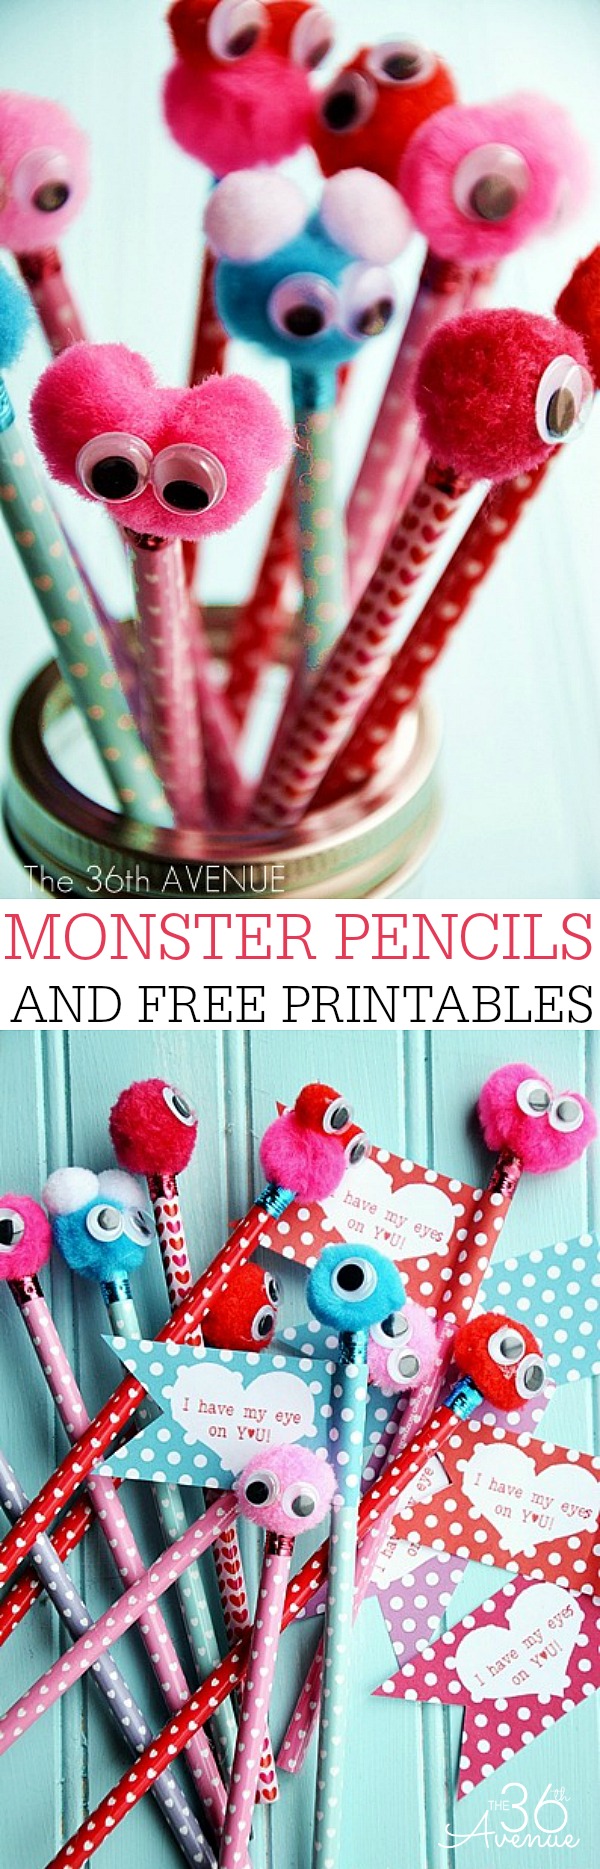 Monster Pencil Tutorial and FREE "I have my eyes on you" PRINTABLES! Find it HERE : https://www.the36thavenue.com/?p=11162 